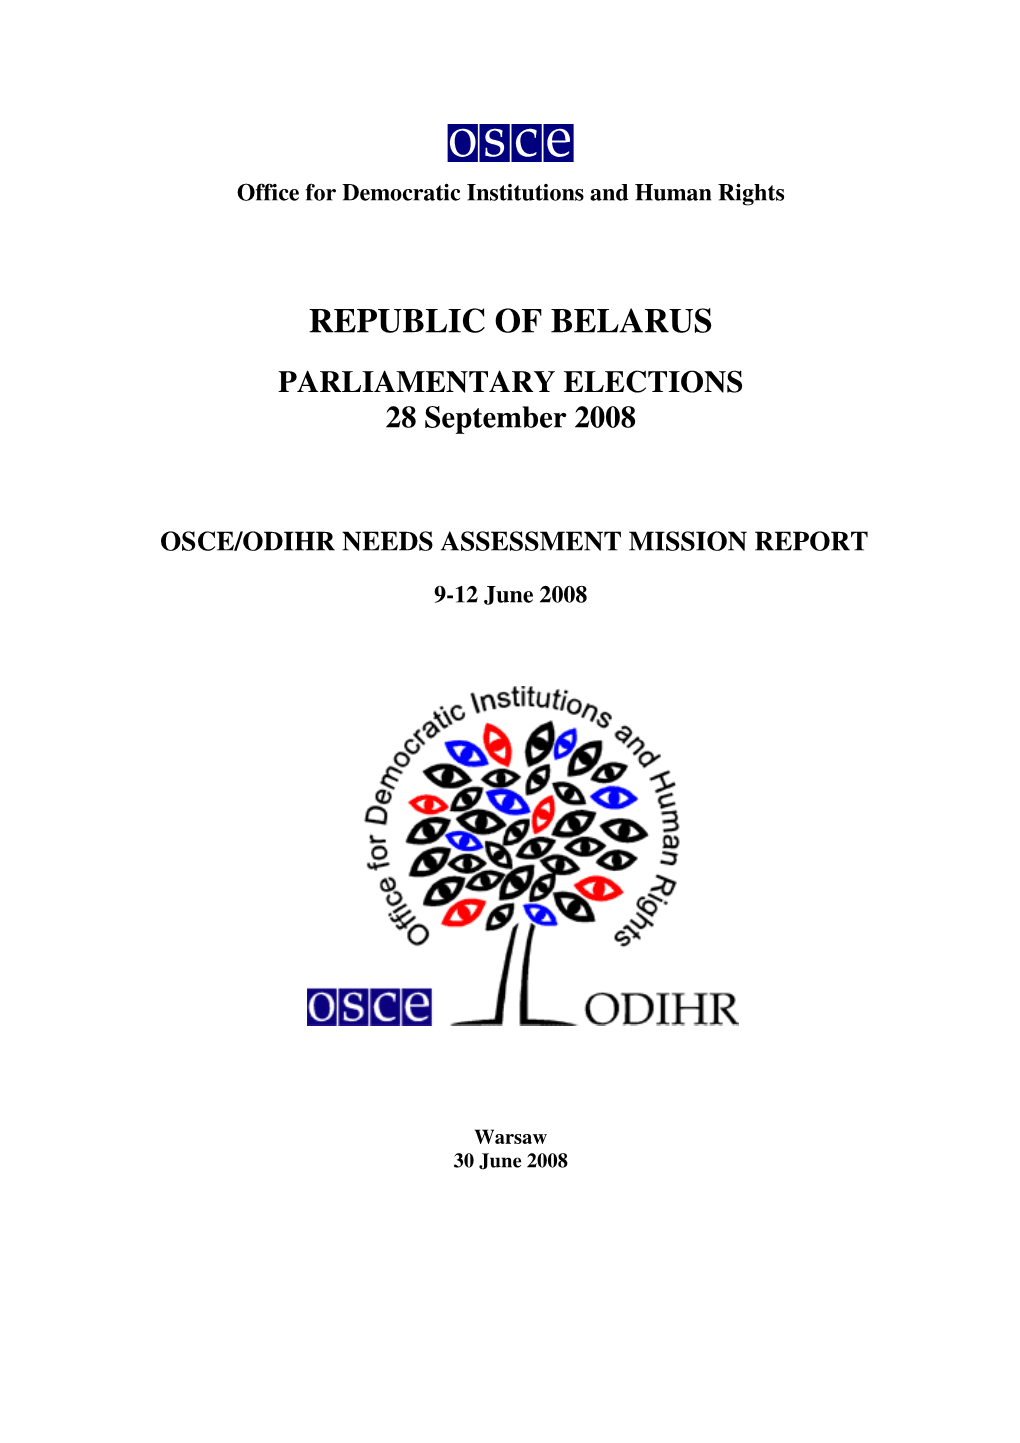 Belarus: Needs Assessment Mission Report, Parliamentary Elections of September 28, OSCE/ODIHR